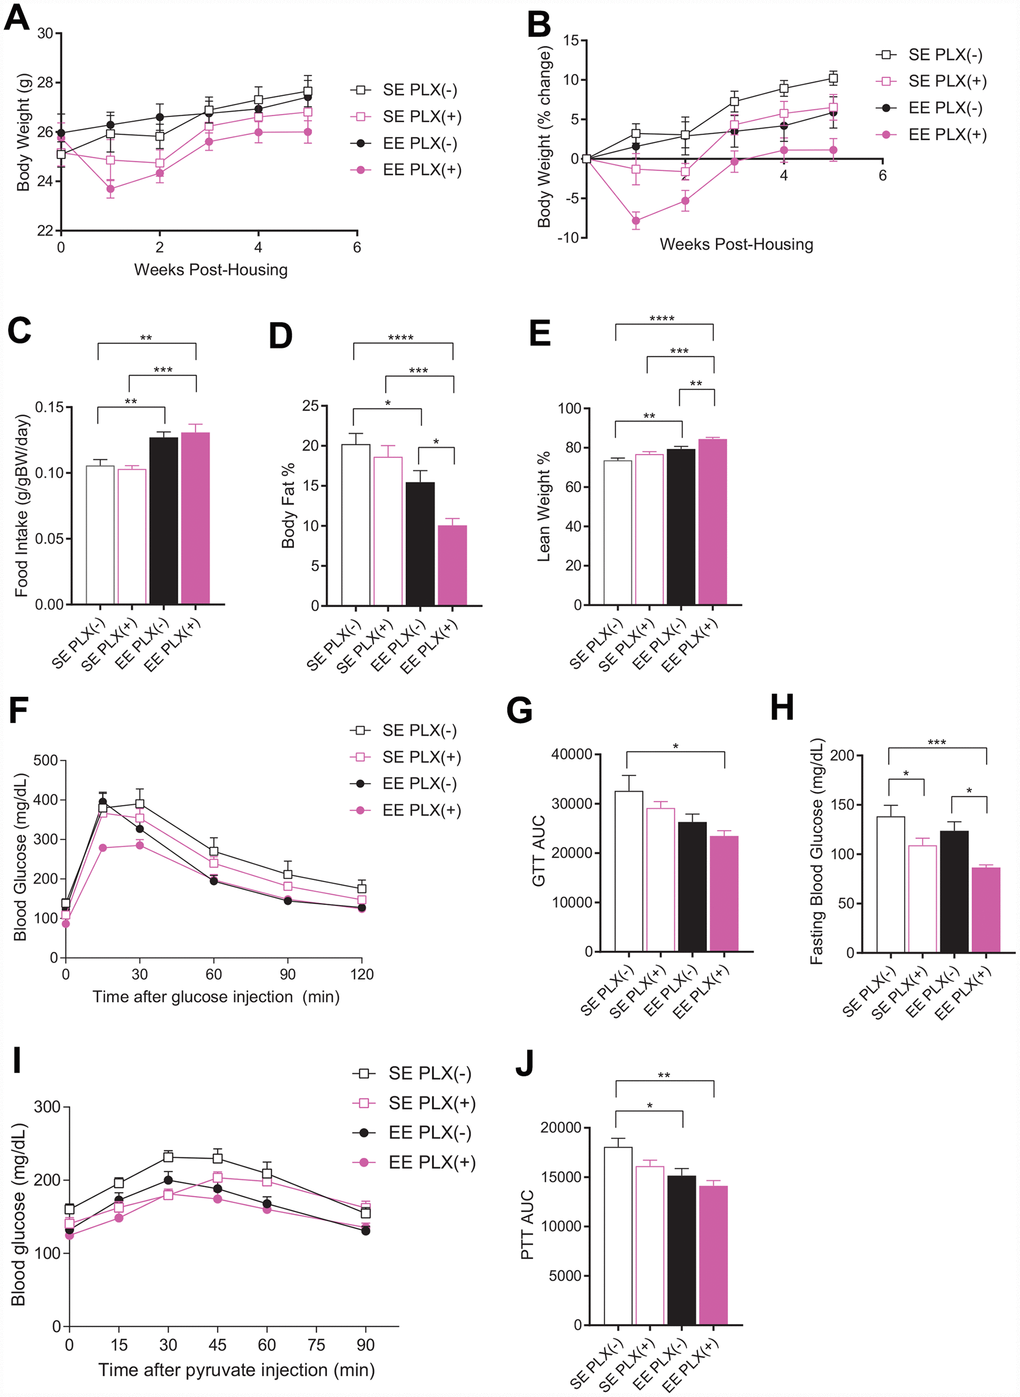 Metabolic outcomes of PLX5622 and environmental enrichment in middle-aged mice. (A) Body weights for animals on PLX(-) or PLX(+) diet in SE or EE across 5 weeks. (B) Body weight as a percentage change from starting body weight. (C) Food intake relative to body weight across 5 weeks. (D) Body fat proportion at 4 weeks. (E) Lean mass proportion. (F) Glucose tolerance test at 5 weeks. (G) Area under the curve. (H) Fasting blood glucose. (I) Pyruvate tolerance test at 6 weeks. (J) Area under the curve. (A, B, D–J) n=10 per group; (C) n=12, 2 cages per group across 6 weeks. *ppppSupplementary File 1.